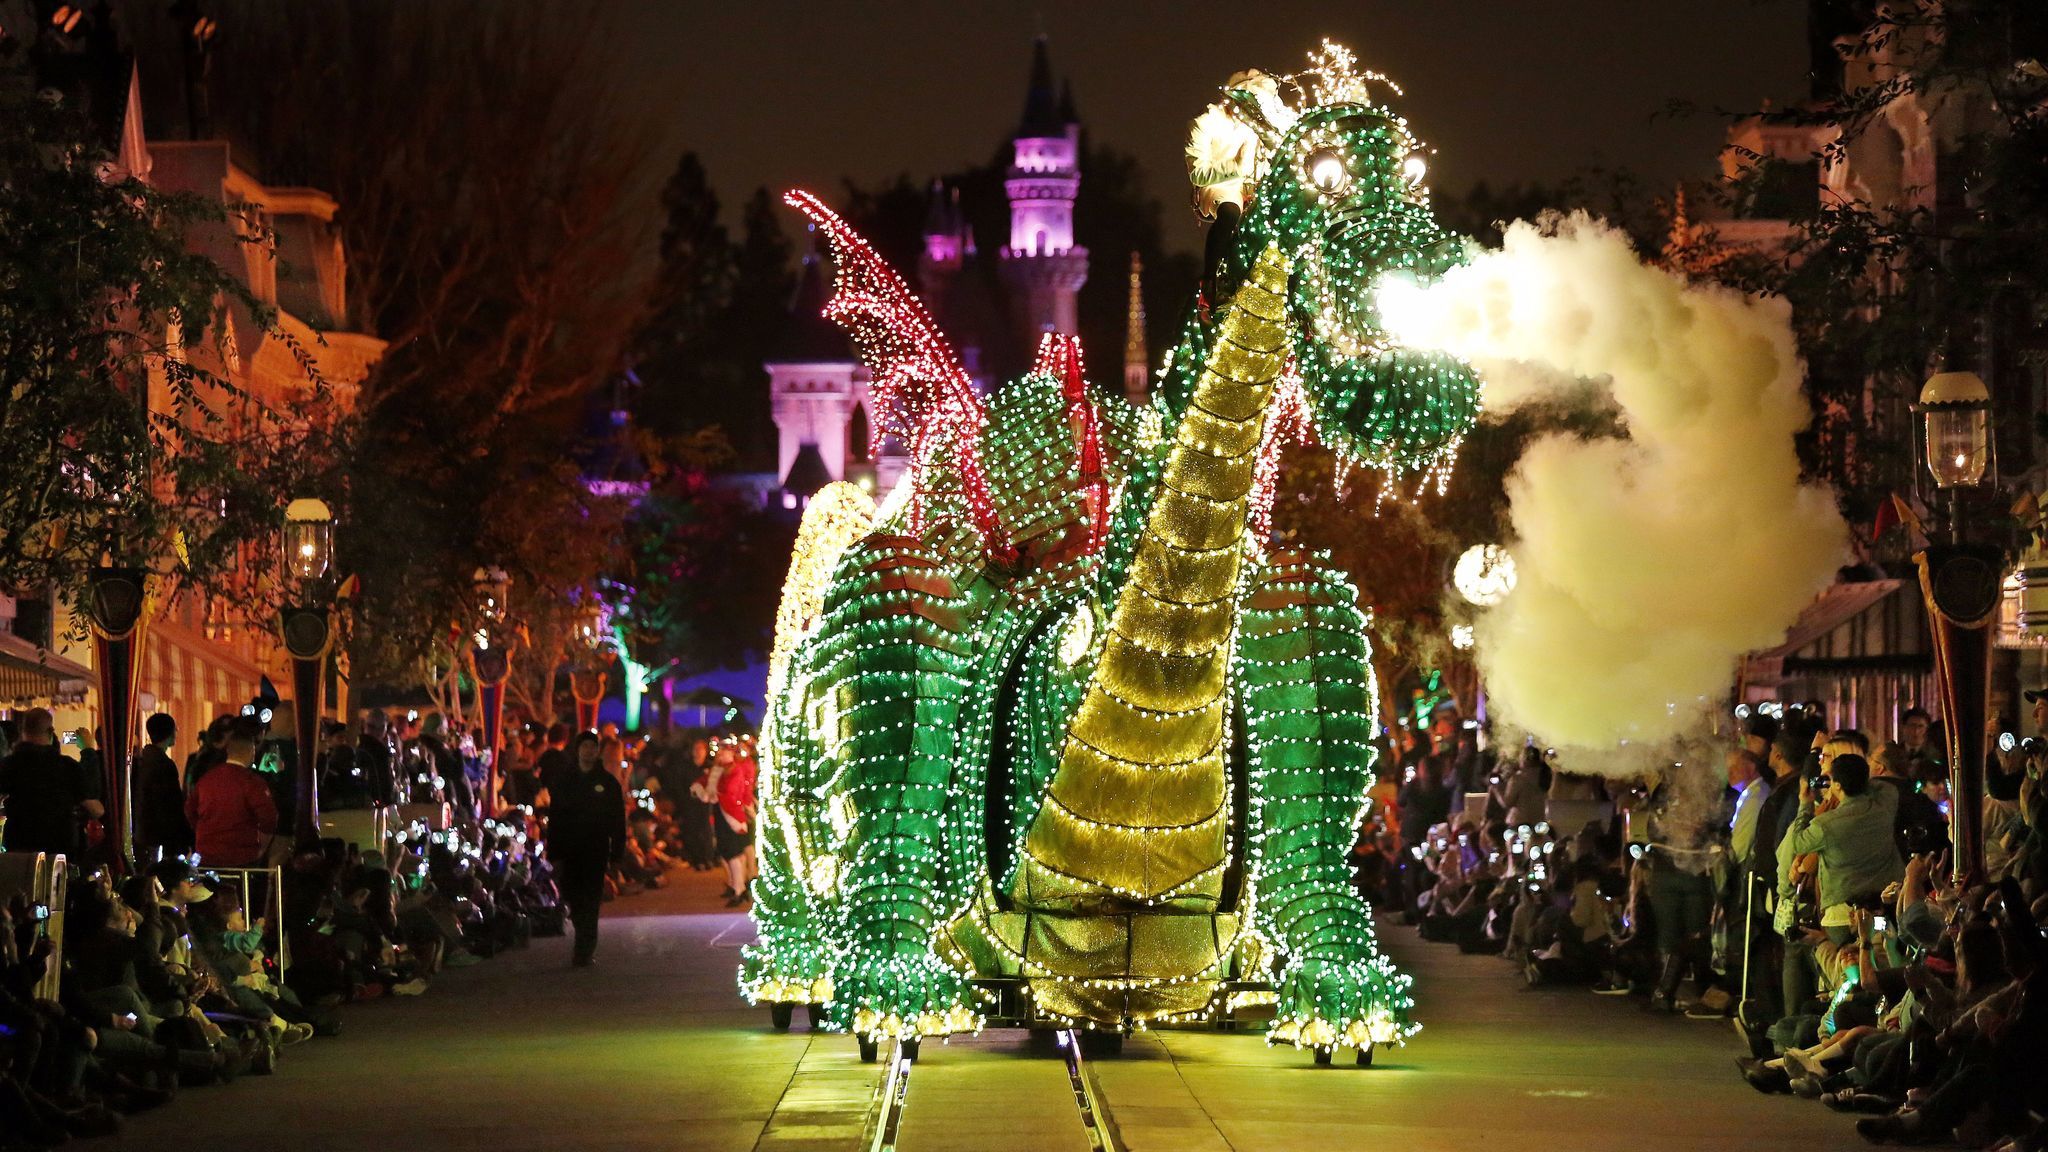 The Main Street Electrical Parade returned to Disneyland earlier this year and runs through Aug. 20.